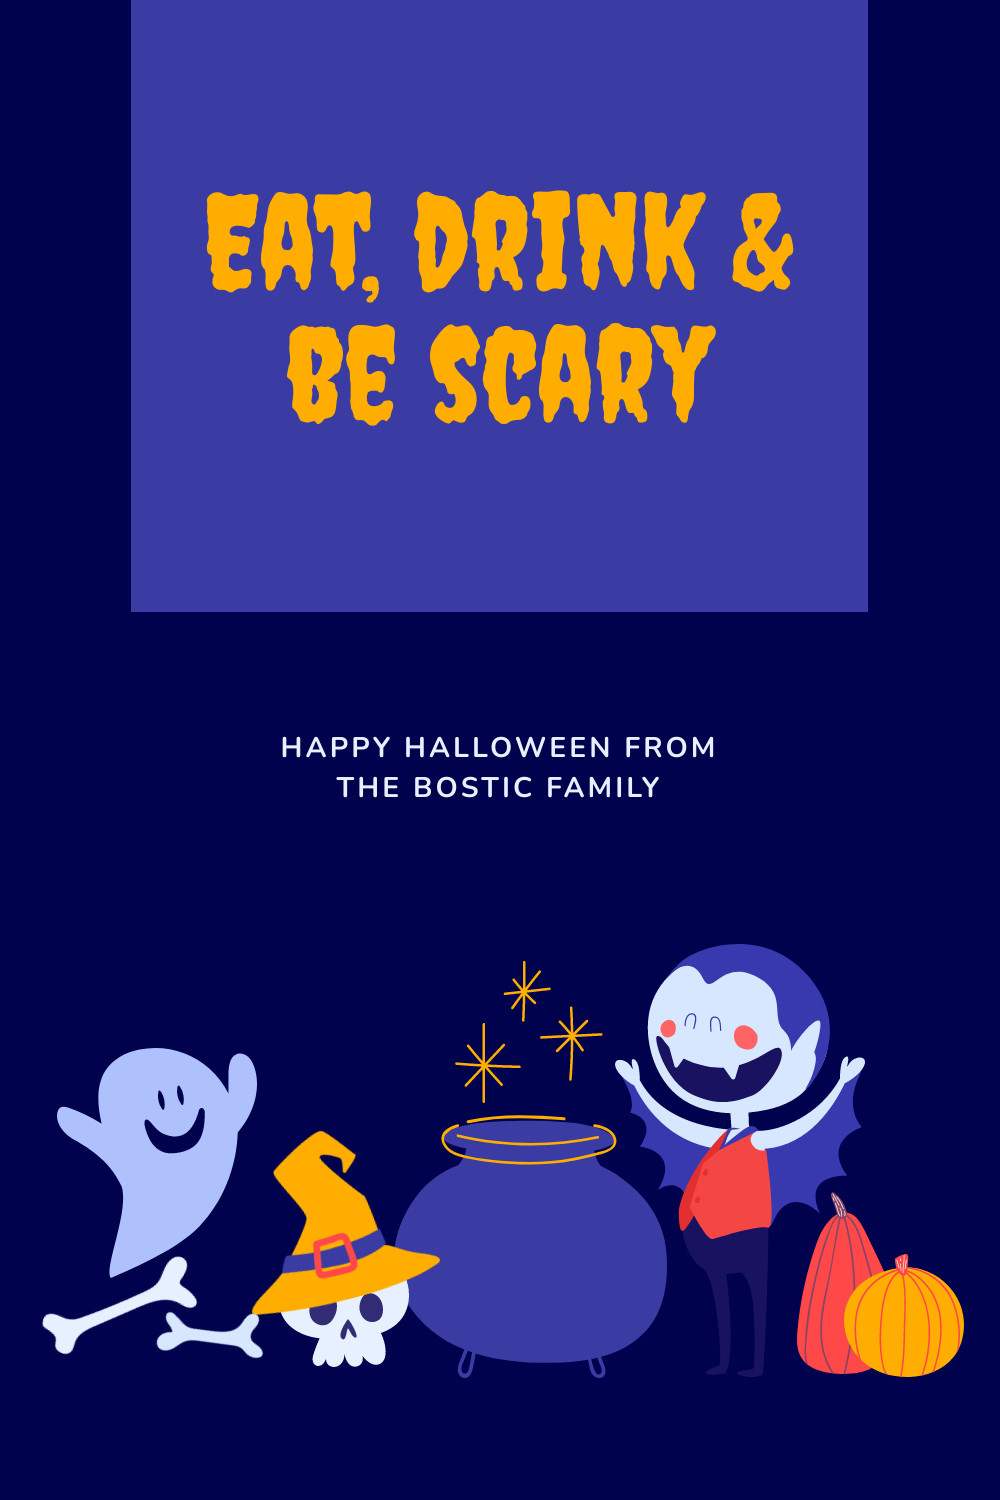 Eat Drink and Be Scary Halloween  Facebook Cover 820x360